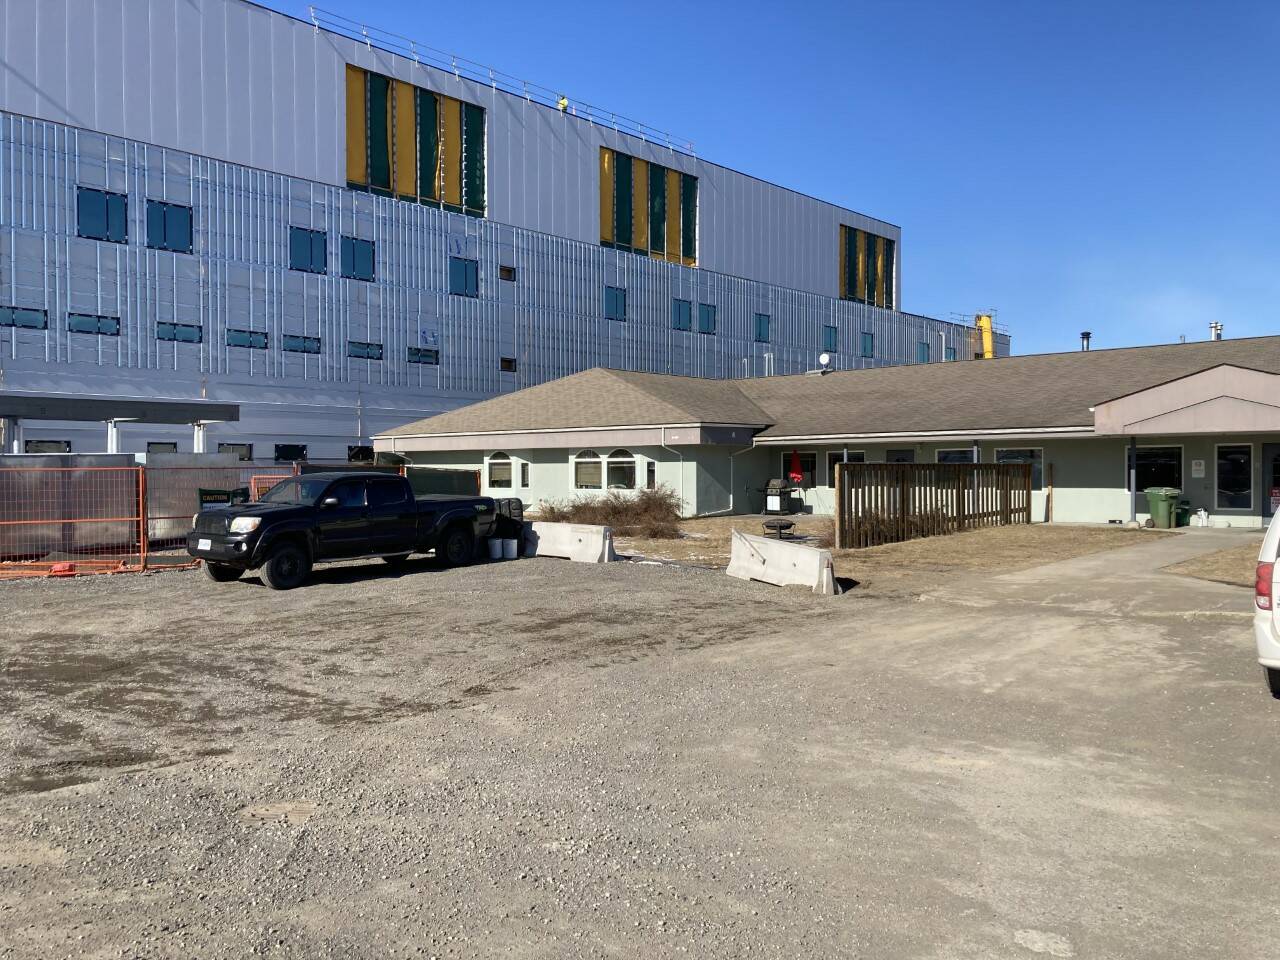 The new Mills Memorial Hospital now under construction looms close to the current Seven Sisters mental health facility which is scheduled to be demolished. (Staff photo)